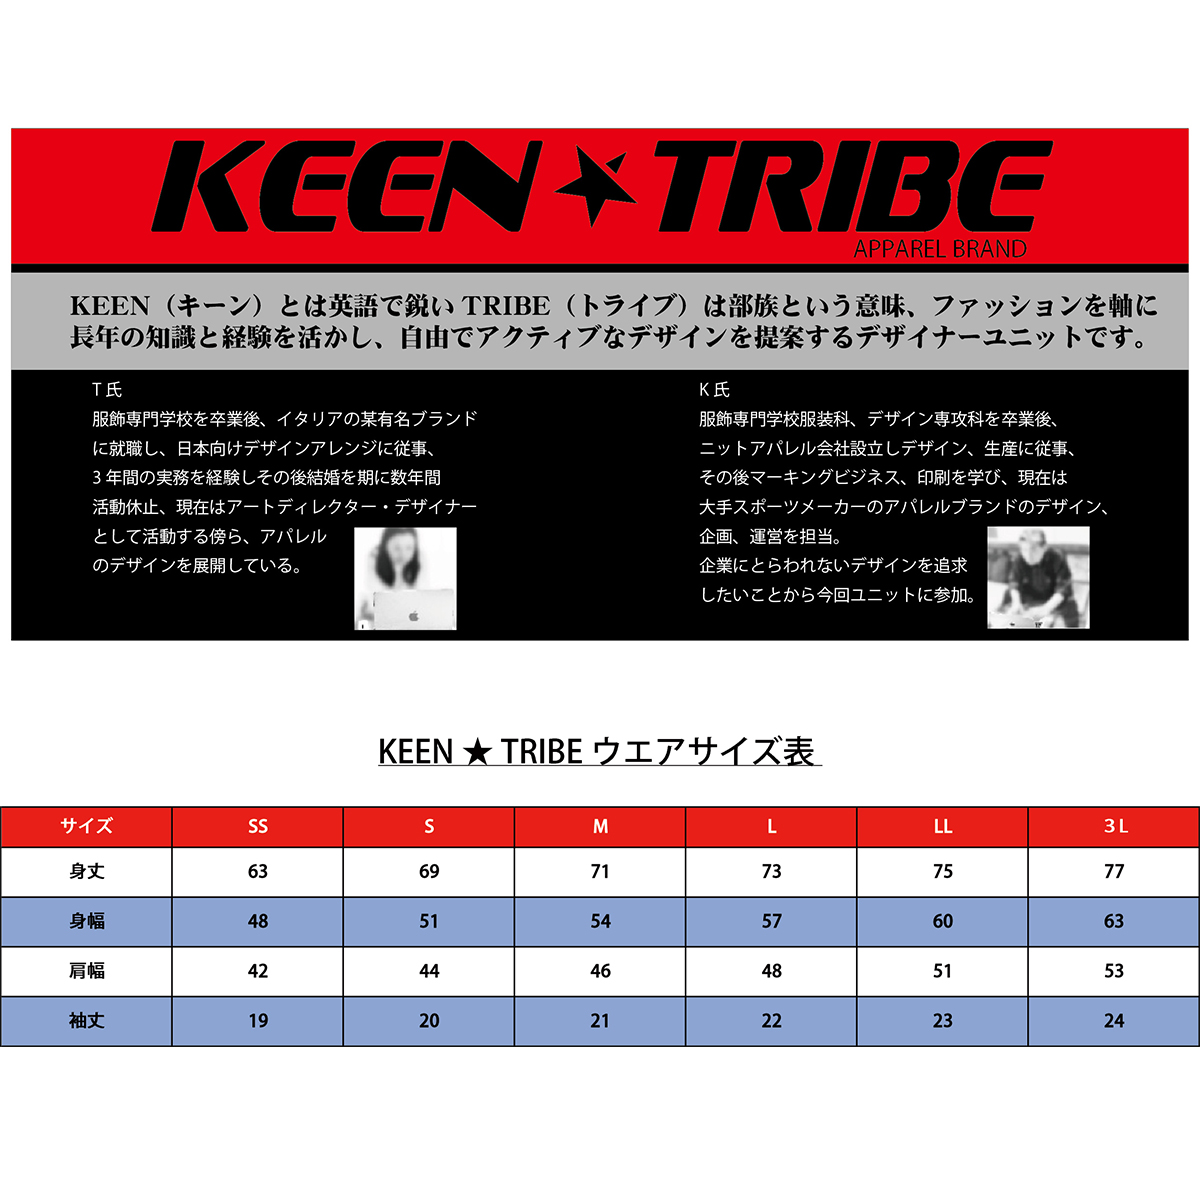 KEEN ★ TRIBE　KT-10(受注生産)